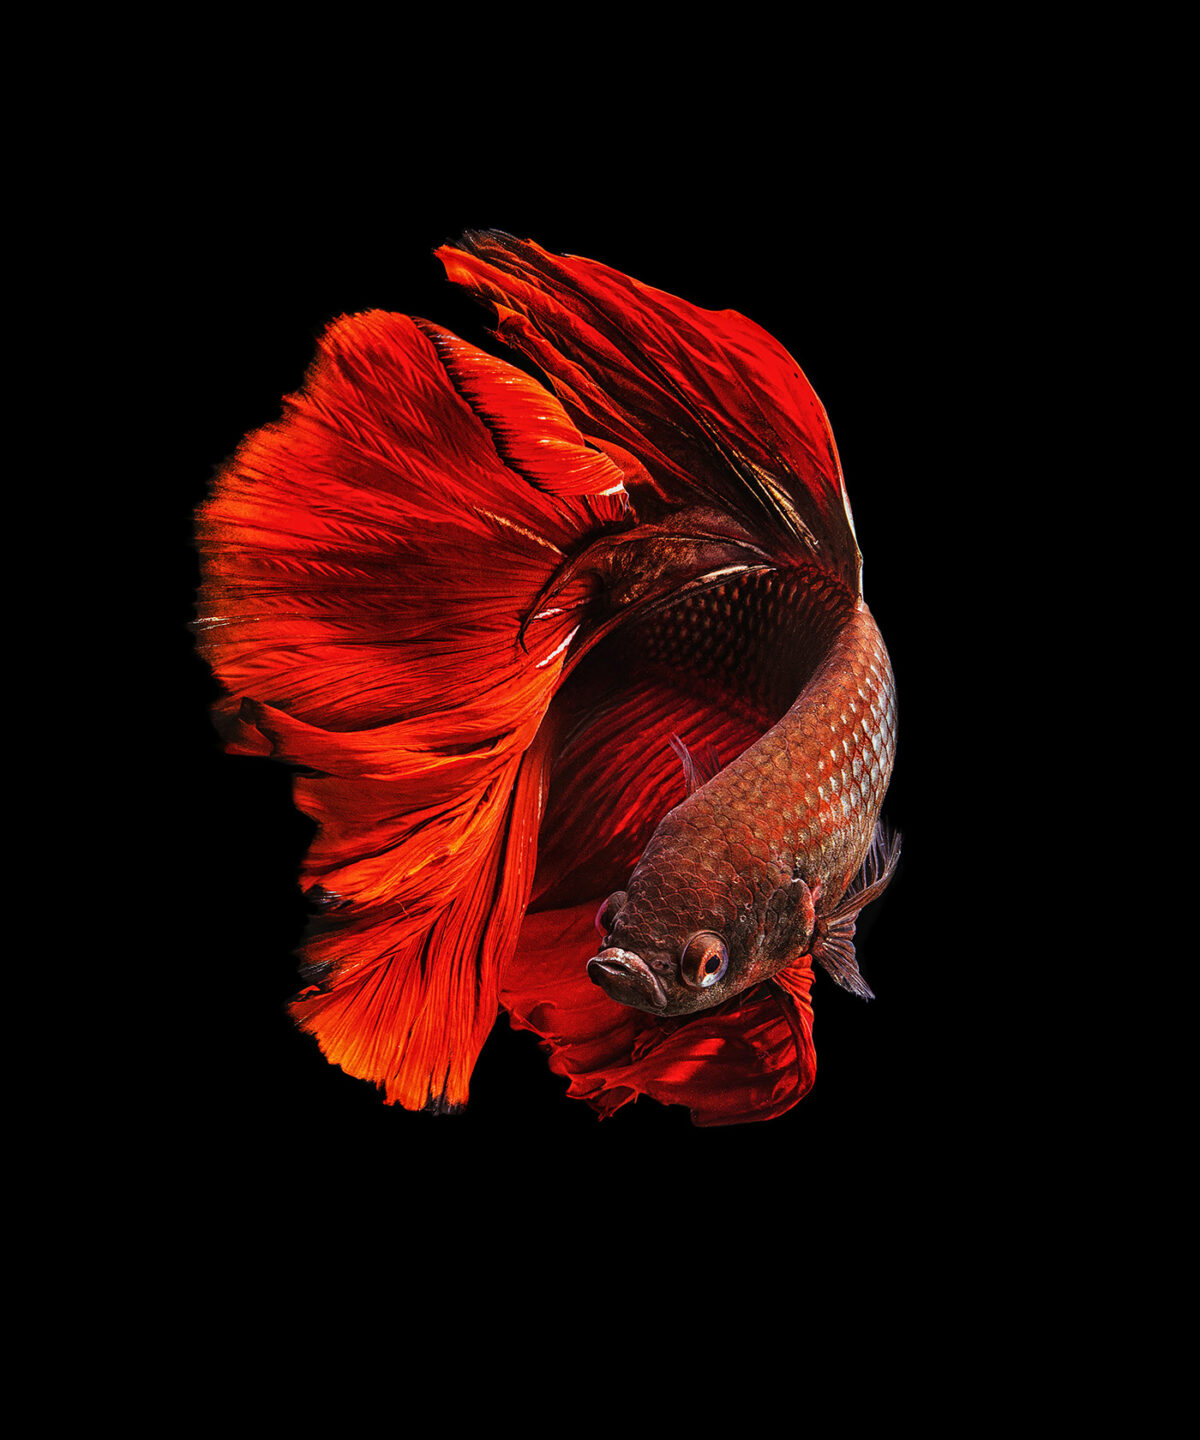 Marvelous Betta Fish Photography By Andi Halil (4)